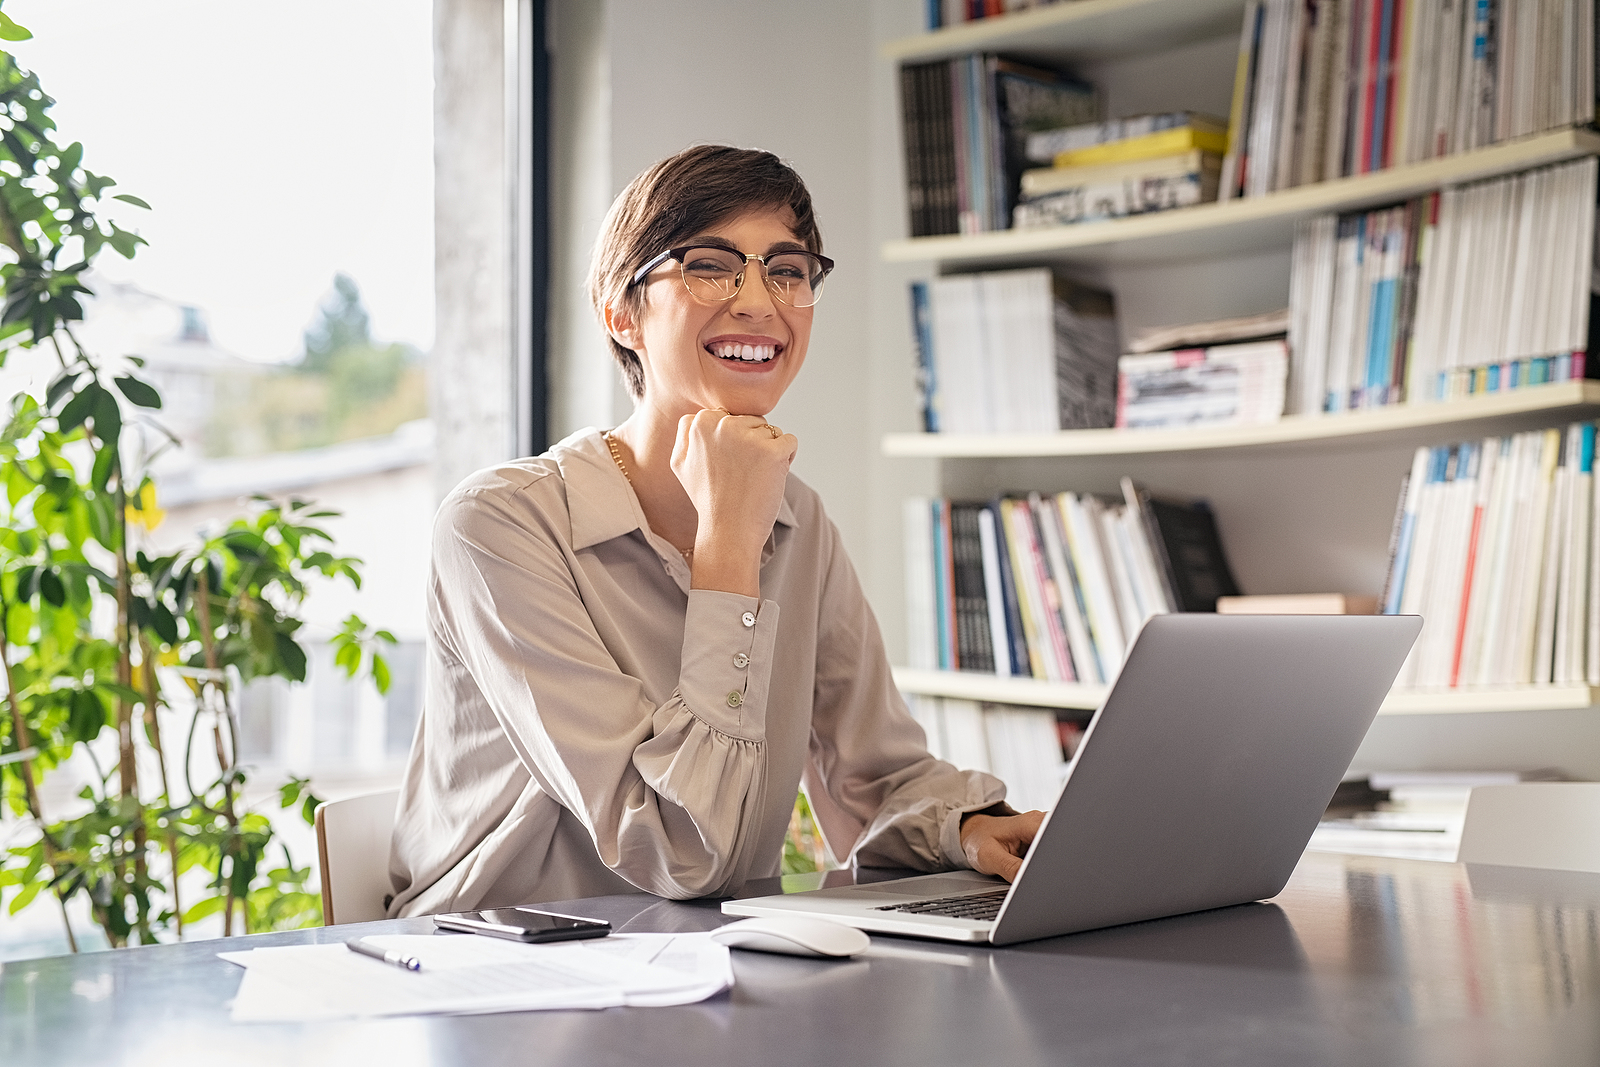 Successful young business woman sitting in creative office and looking at camera. Portrait of happy entrepreneur working on computer. Smiling businesswoman using laptop to start rebuilding credit after bankruptcy while working from home.